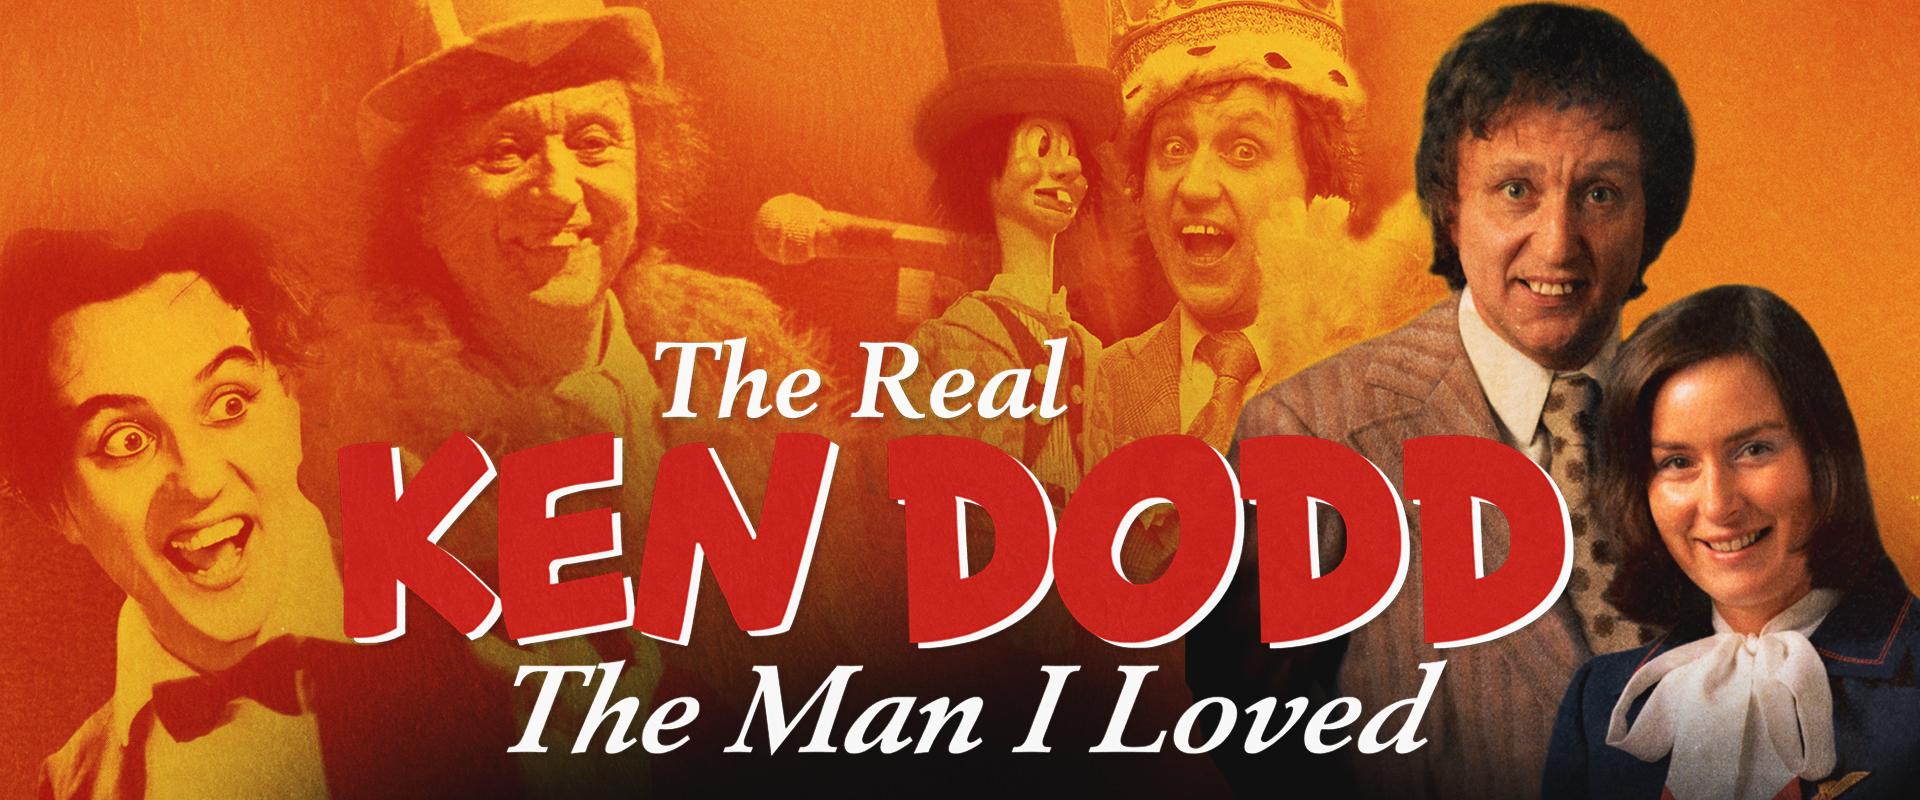 The Real Ken Dodd, The Man I Loved